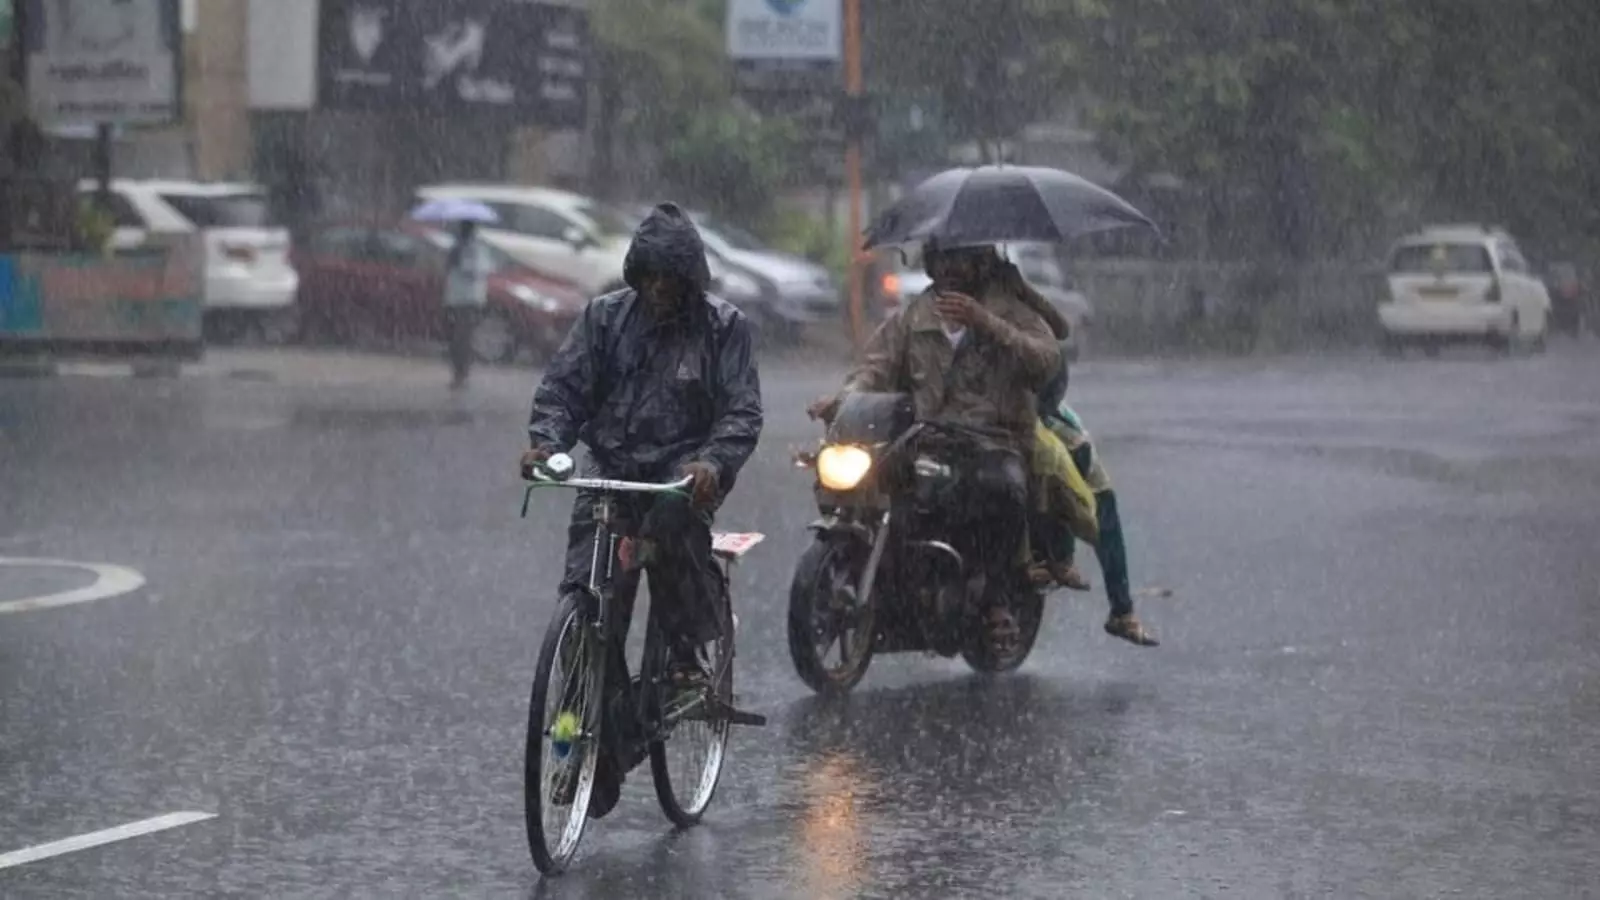 Gujarat likely to get above-average rainfall